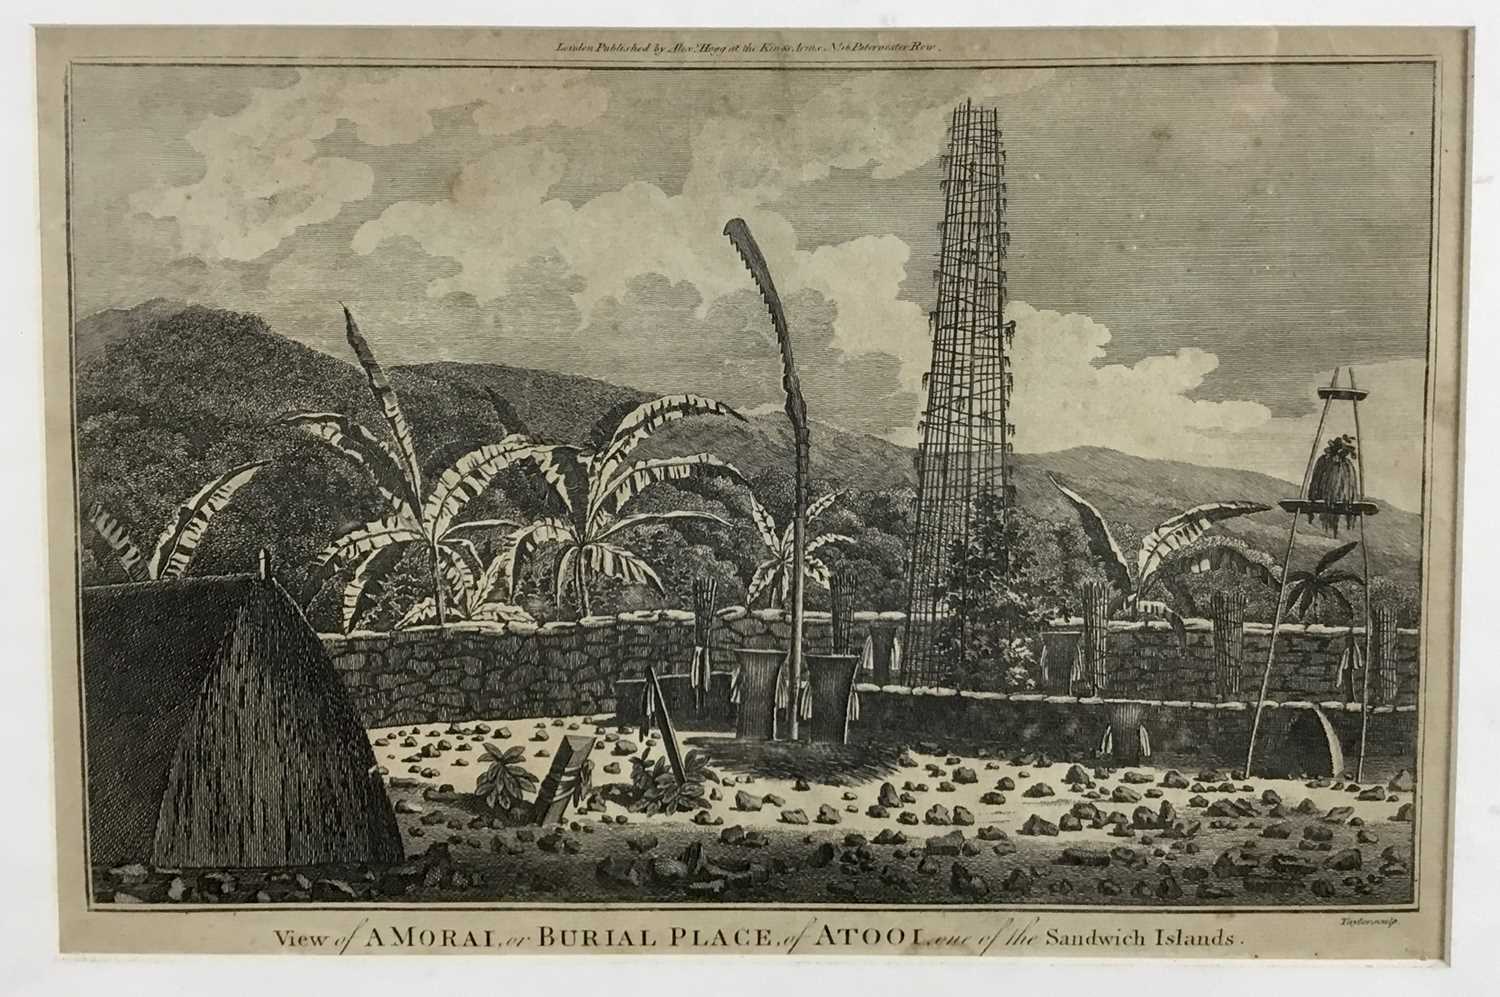 A View of a Morai or Burial Place, of Atooi, one of the Sandwich Islands, engraving, Pub. Alex Hogg